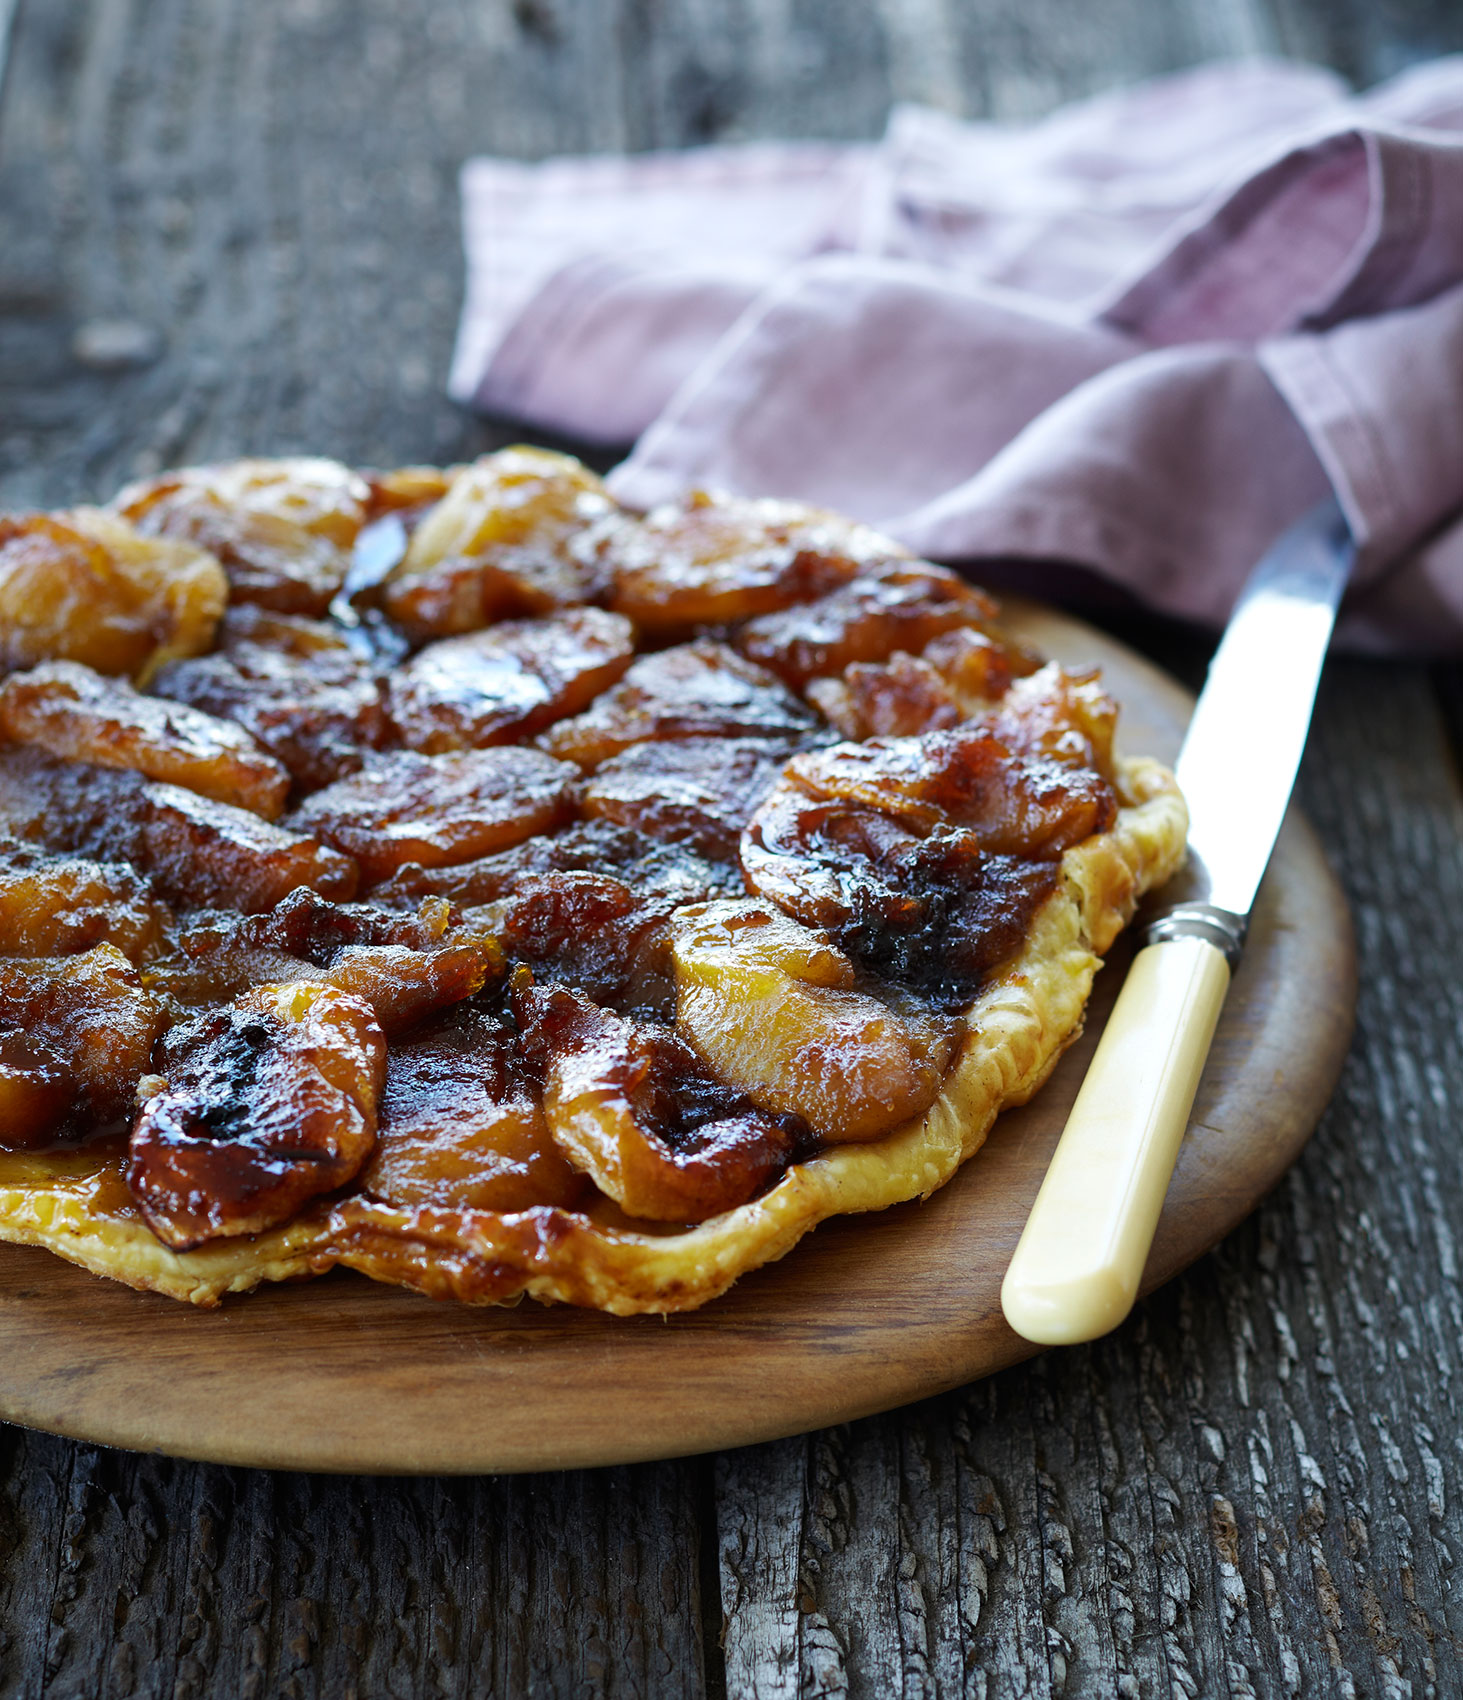 Free Range in the City • Rustic Tarte Tatin on Wooden Board with Lavender Tea Towel • Cookbook & Lifestyle Food Photography